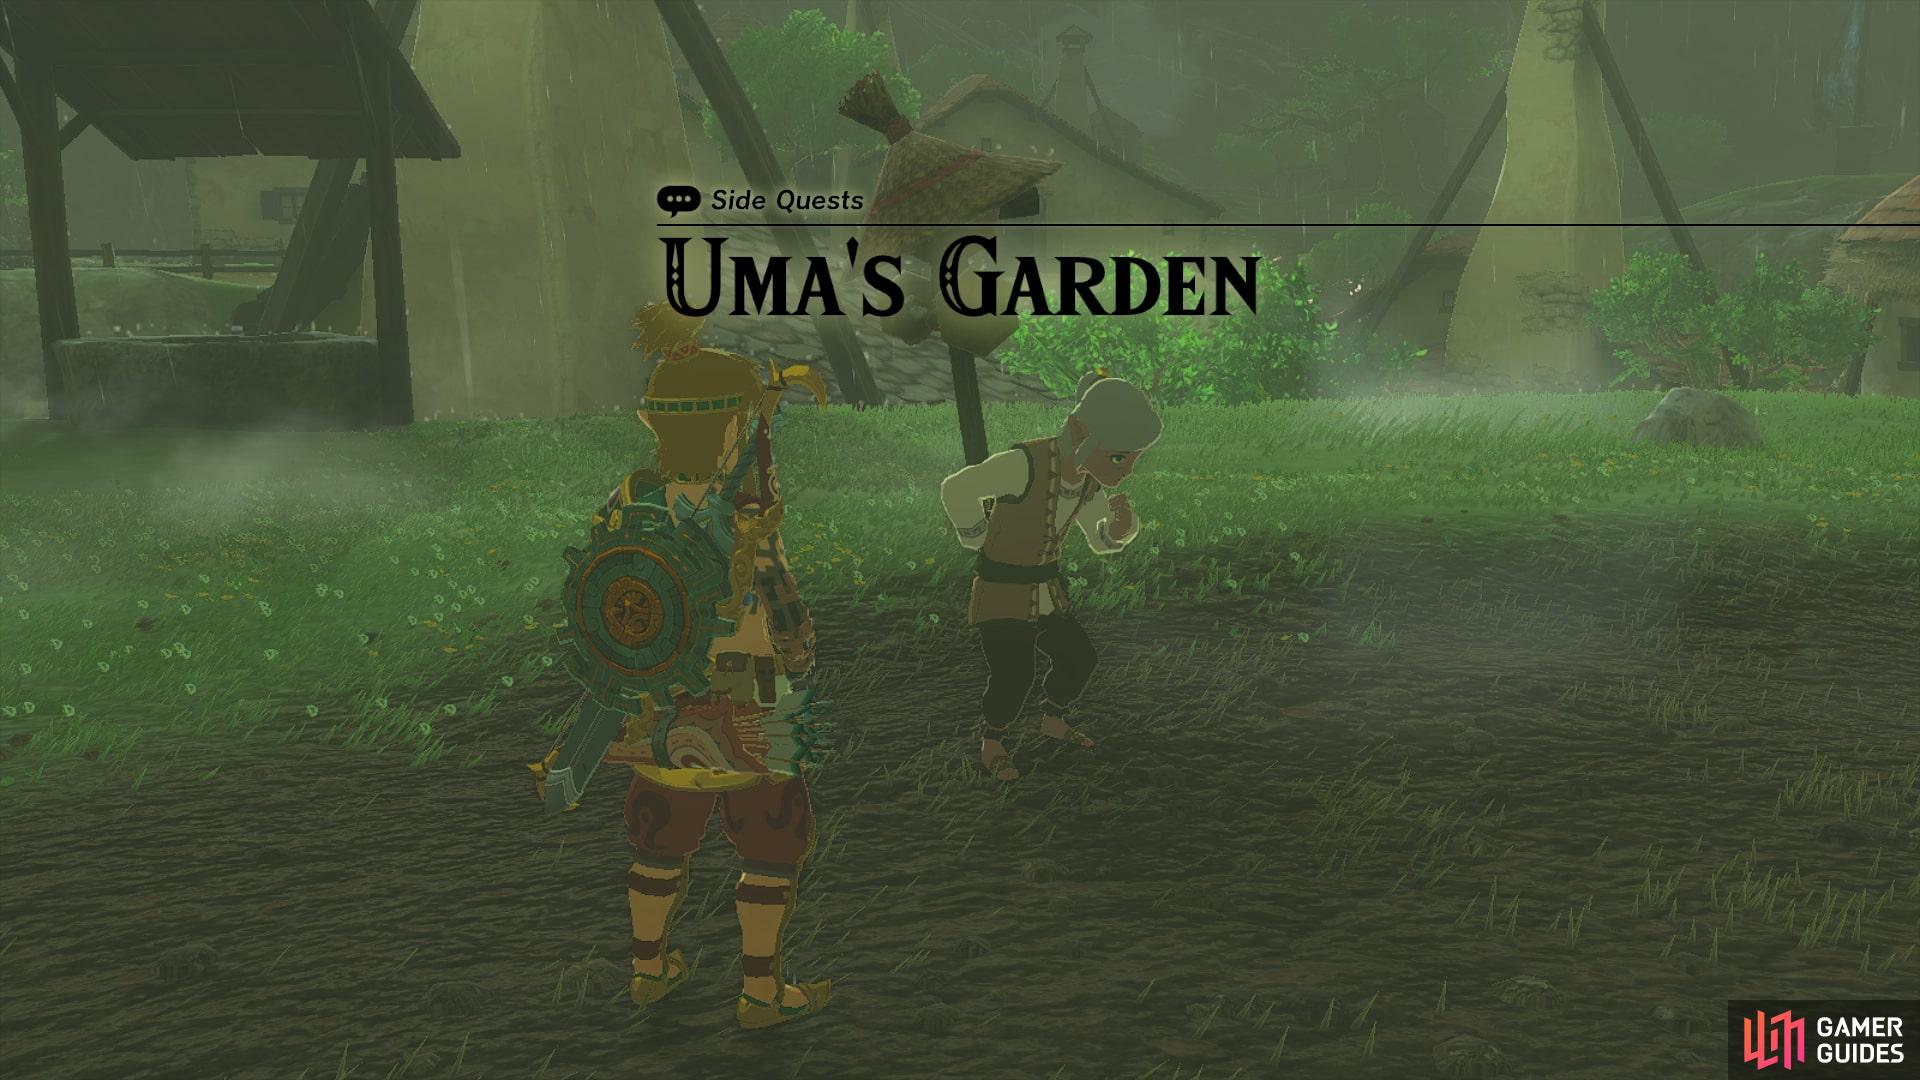 Starting Uma’s Garden gives Link the ability to grow crops near the Hateno Village school.